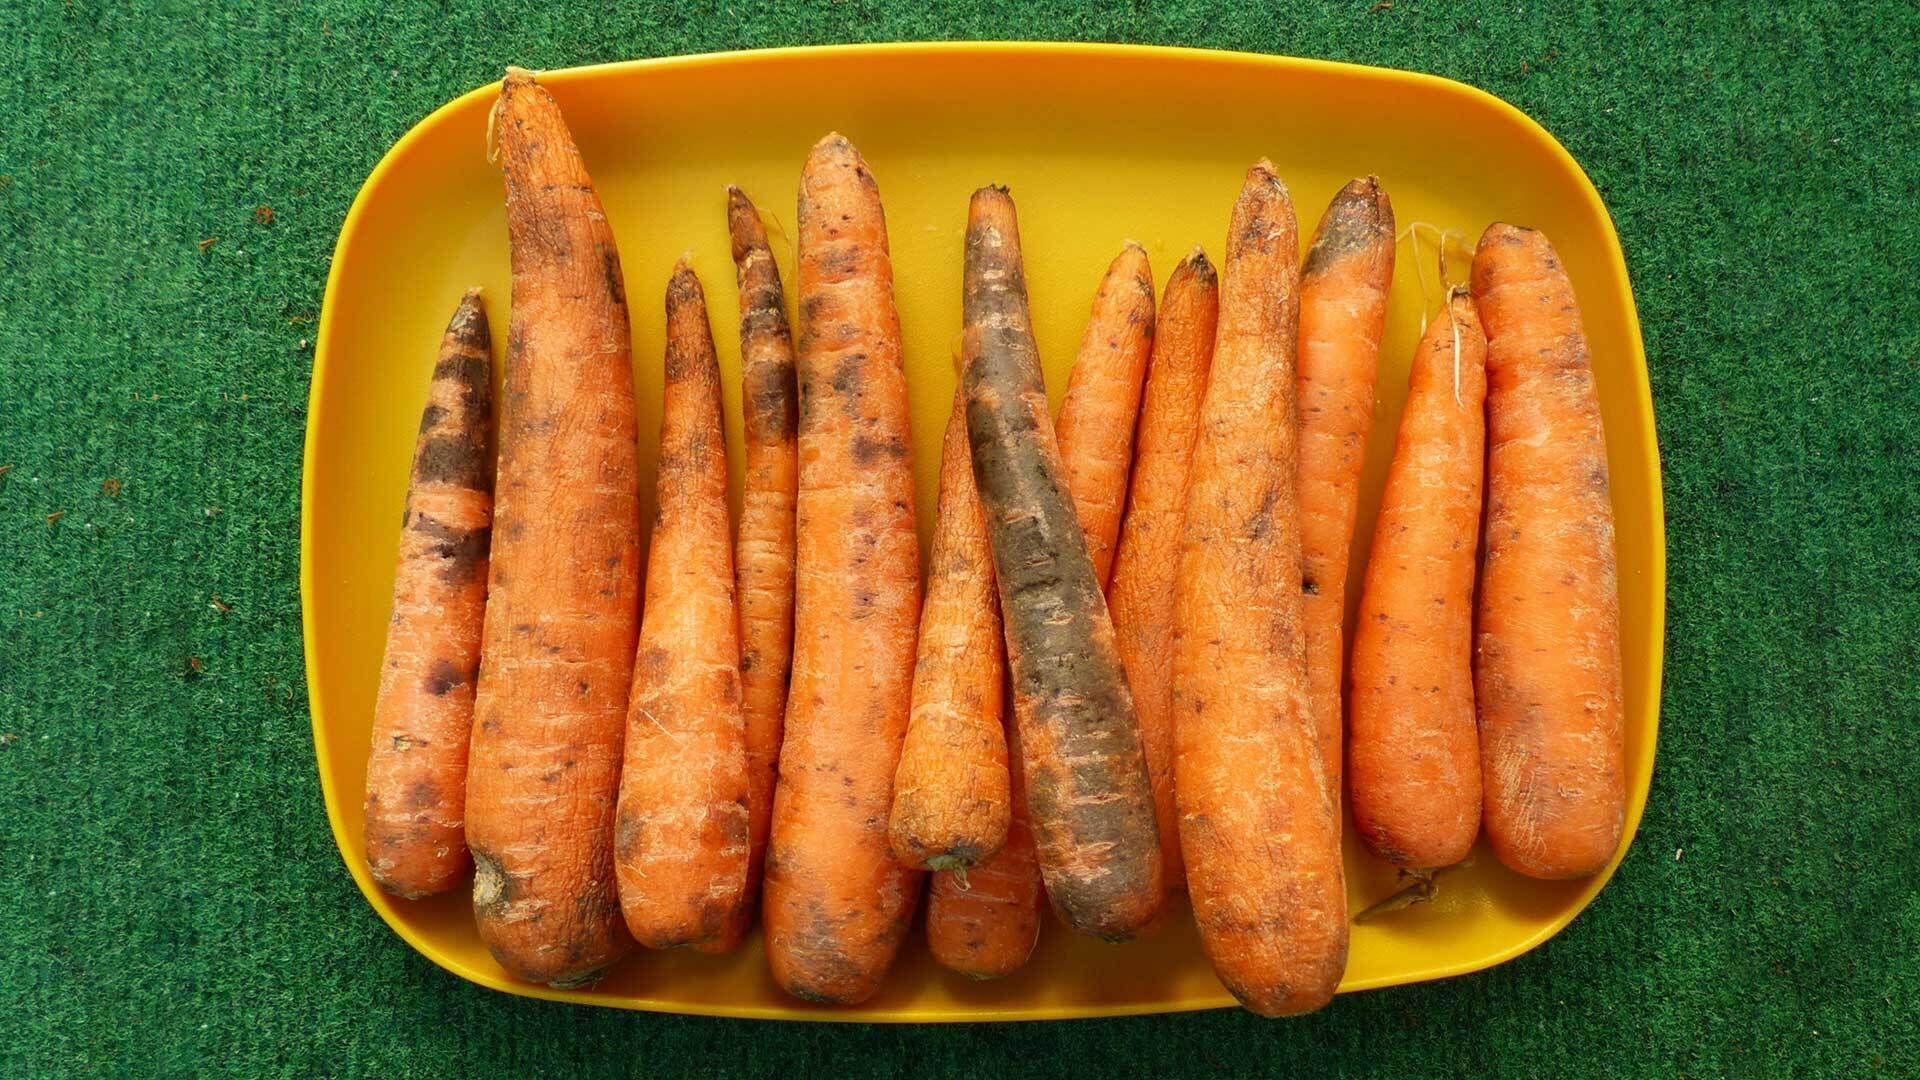 Recycle or throw away: Is it still okay to eat moldy carrots?